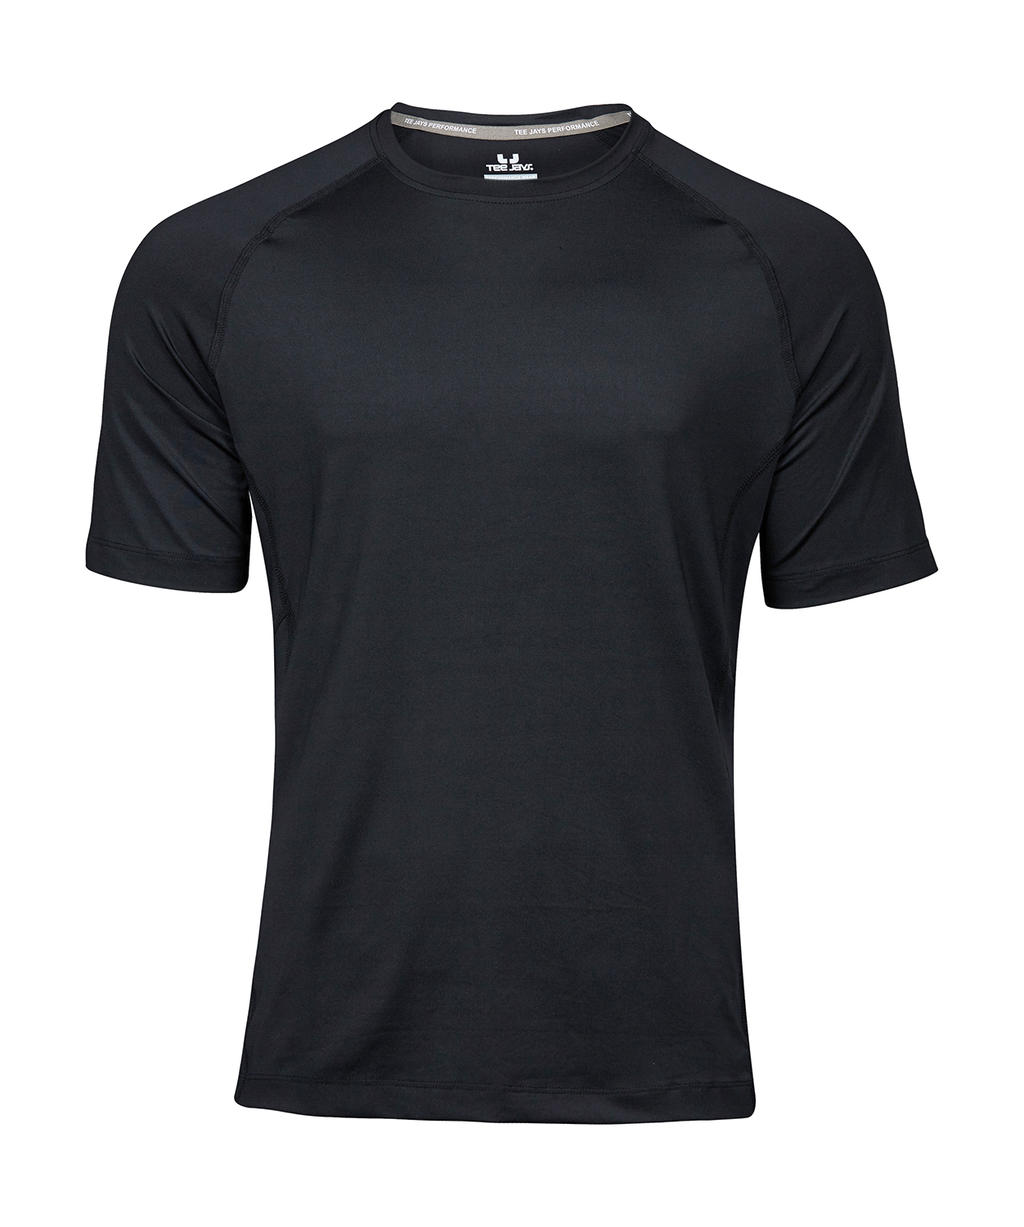  COOLdry Tee in Farbe Black